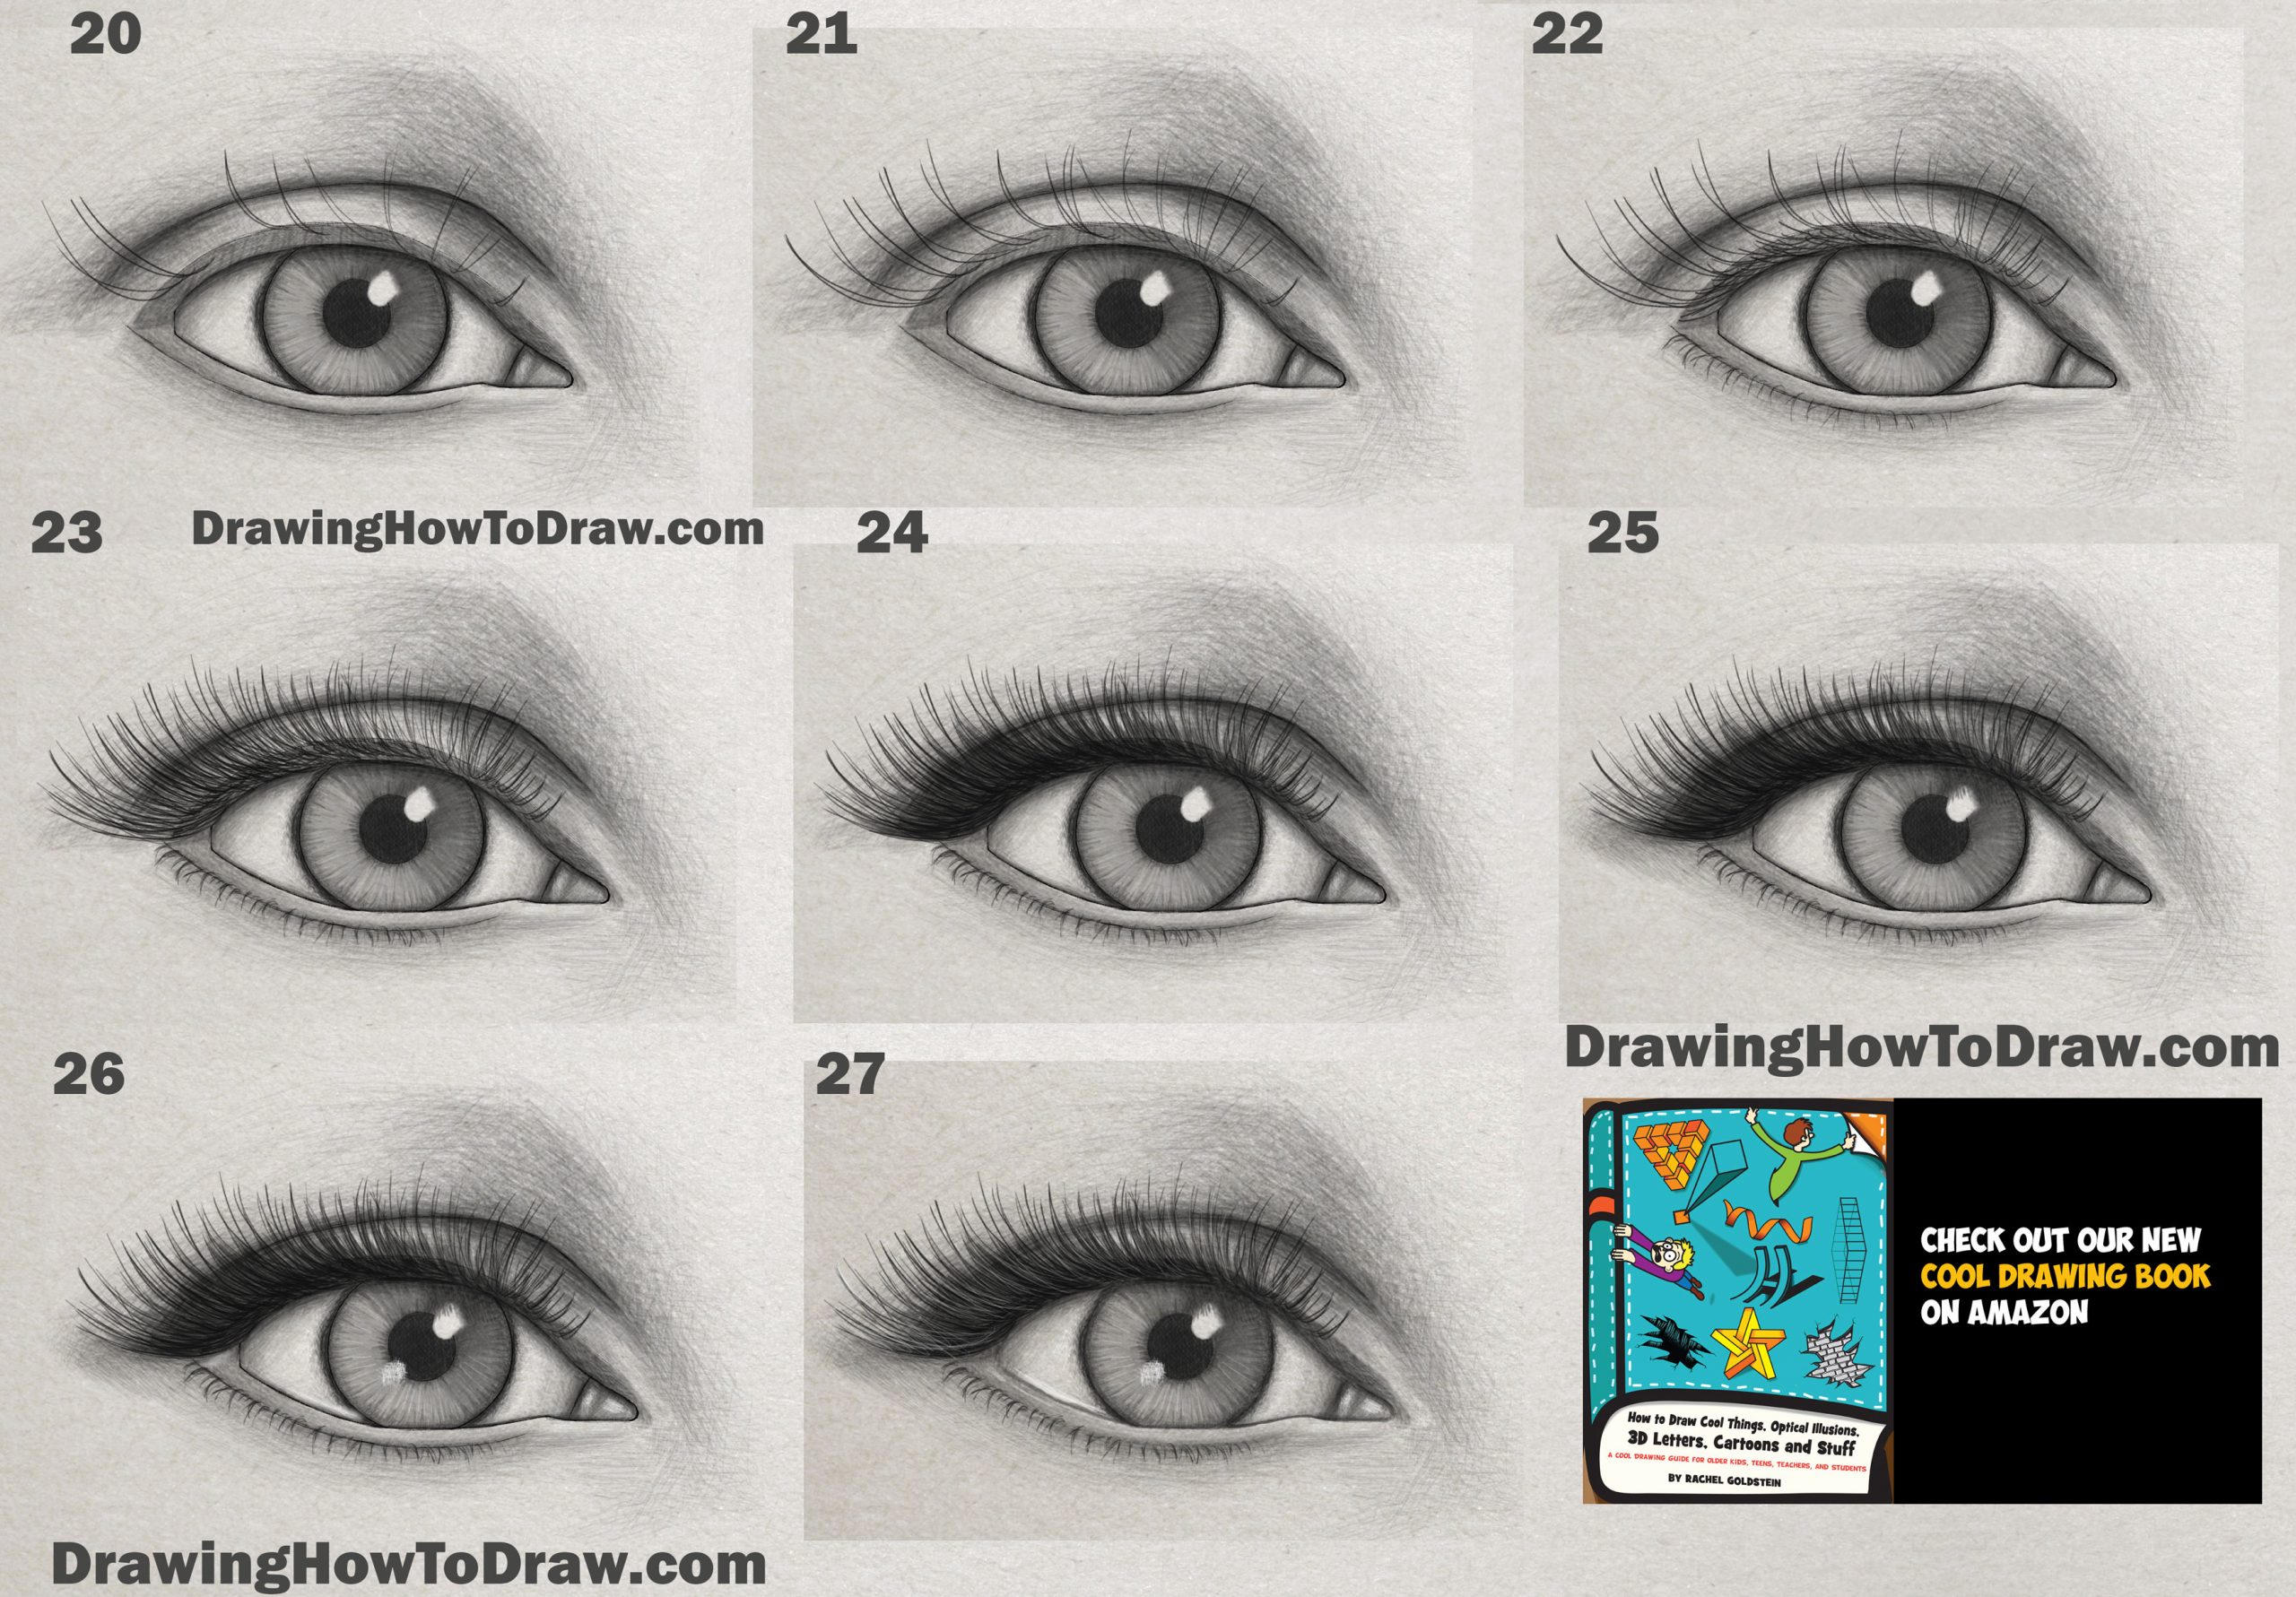 How To Draw A Realistic Dog Eye Step By Step / Fill in the eyebrows as